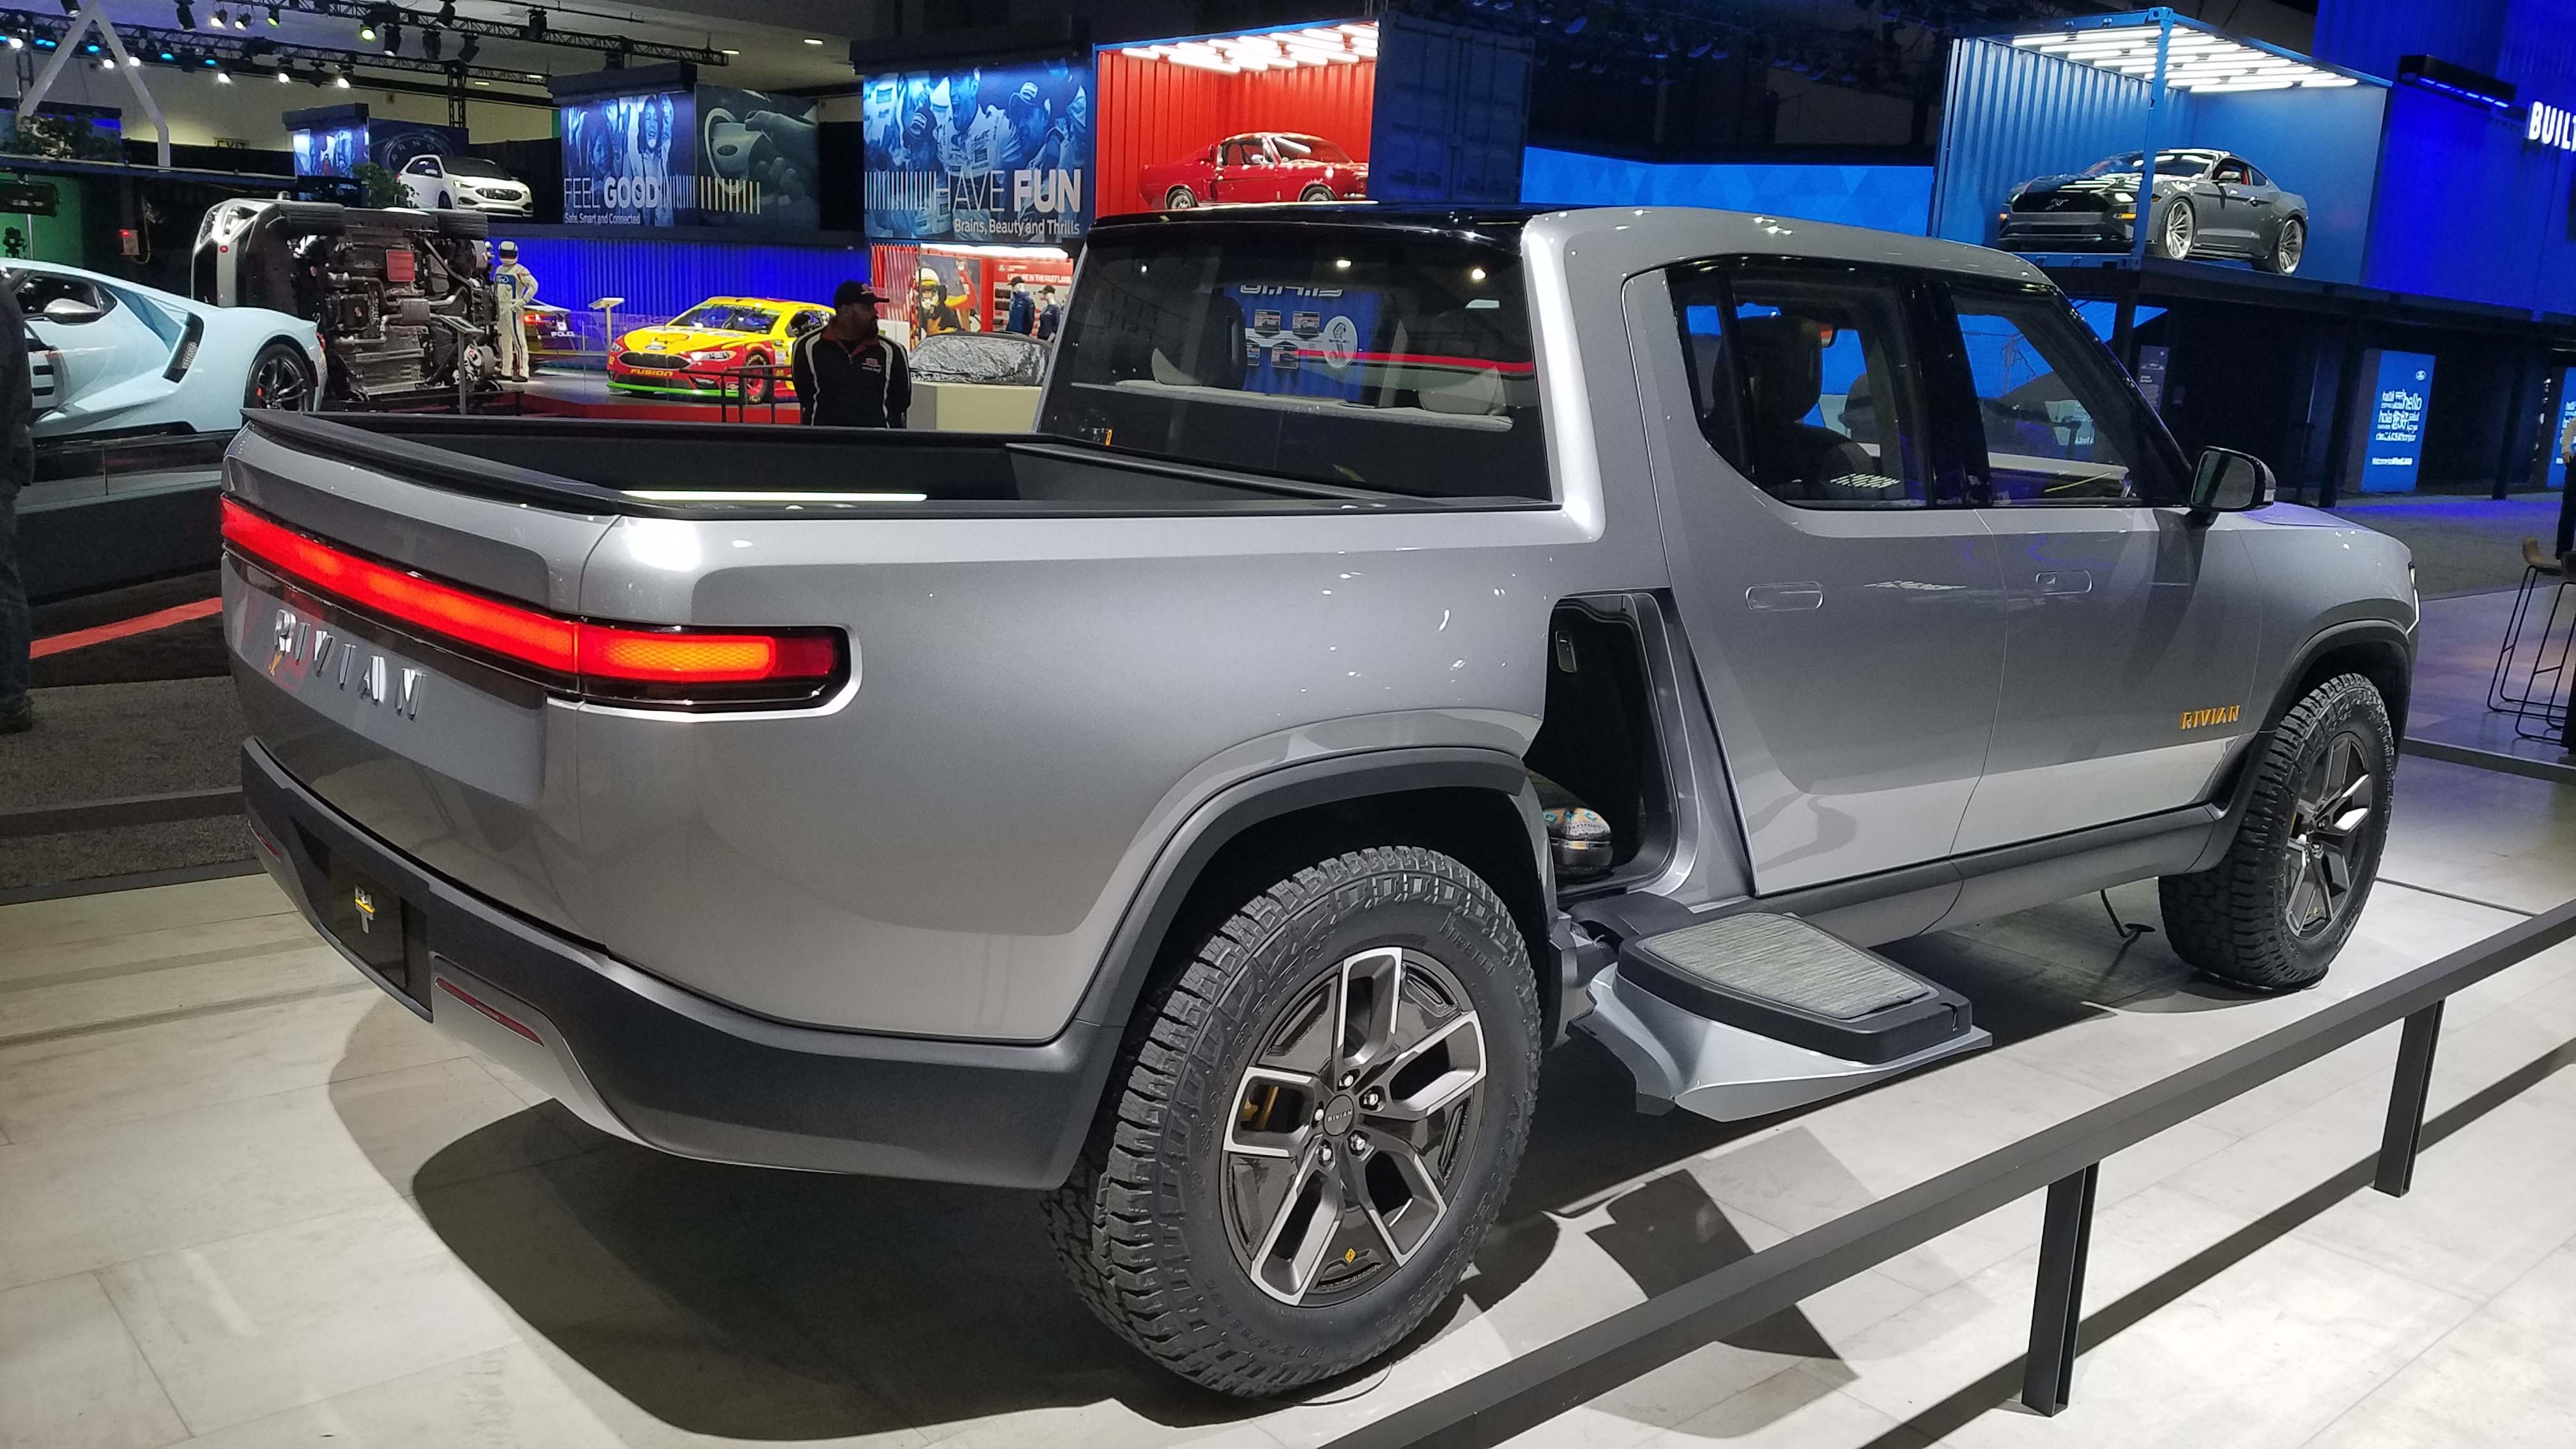 The Rivian R1T is about the same length as a Chevy Colorado mid-size pickup. With its batteries in the floor, however, it adds storage in the "frunk" as well as space behind the rear seats and under the bed.